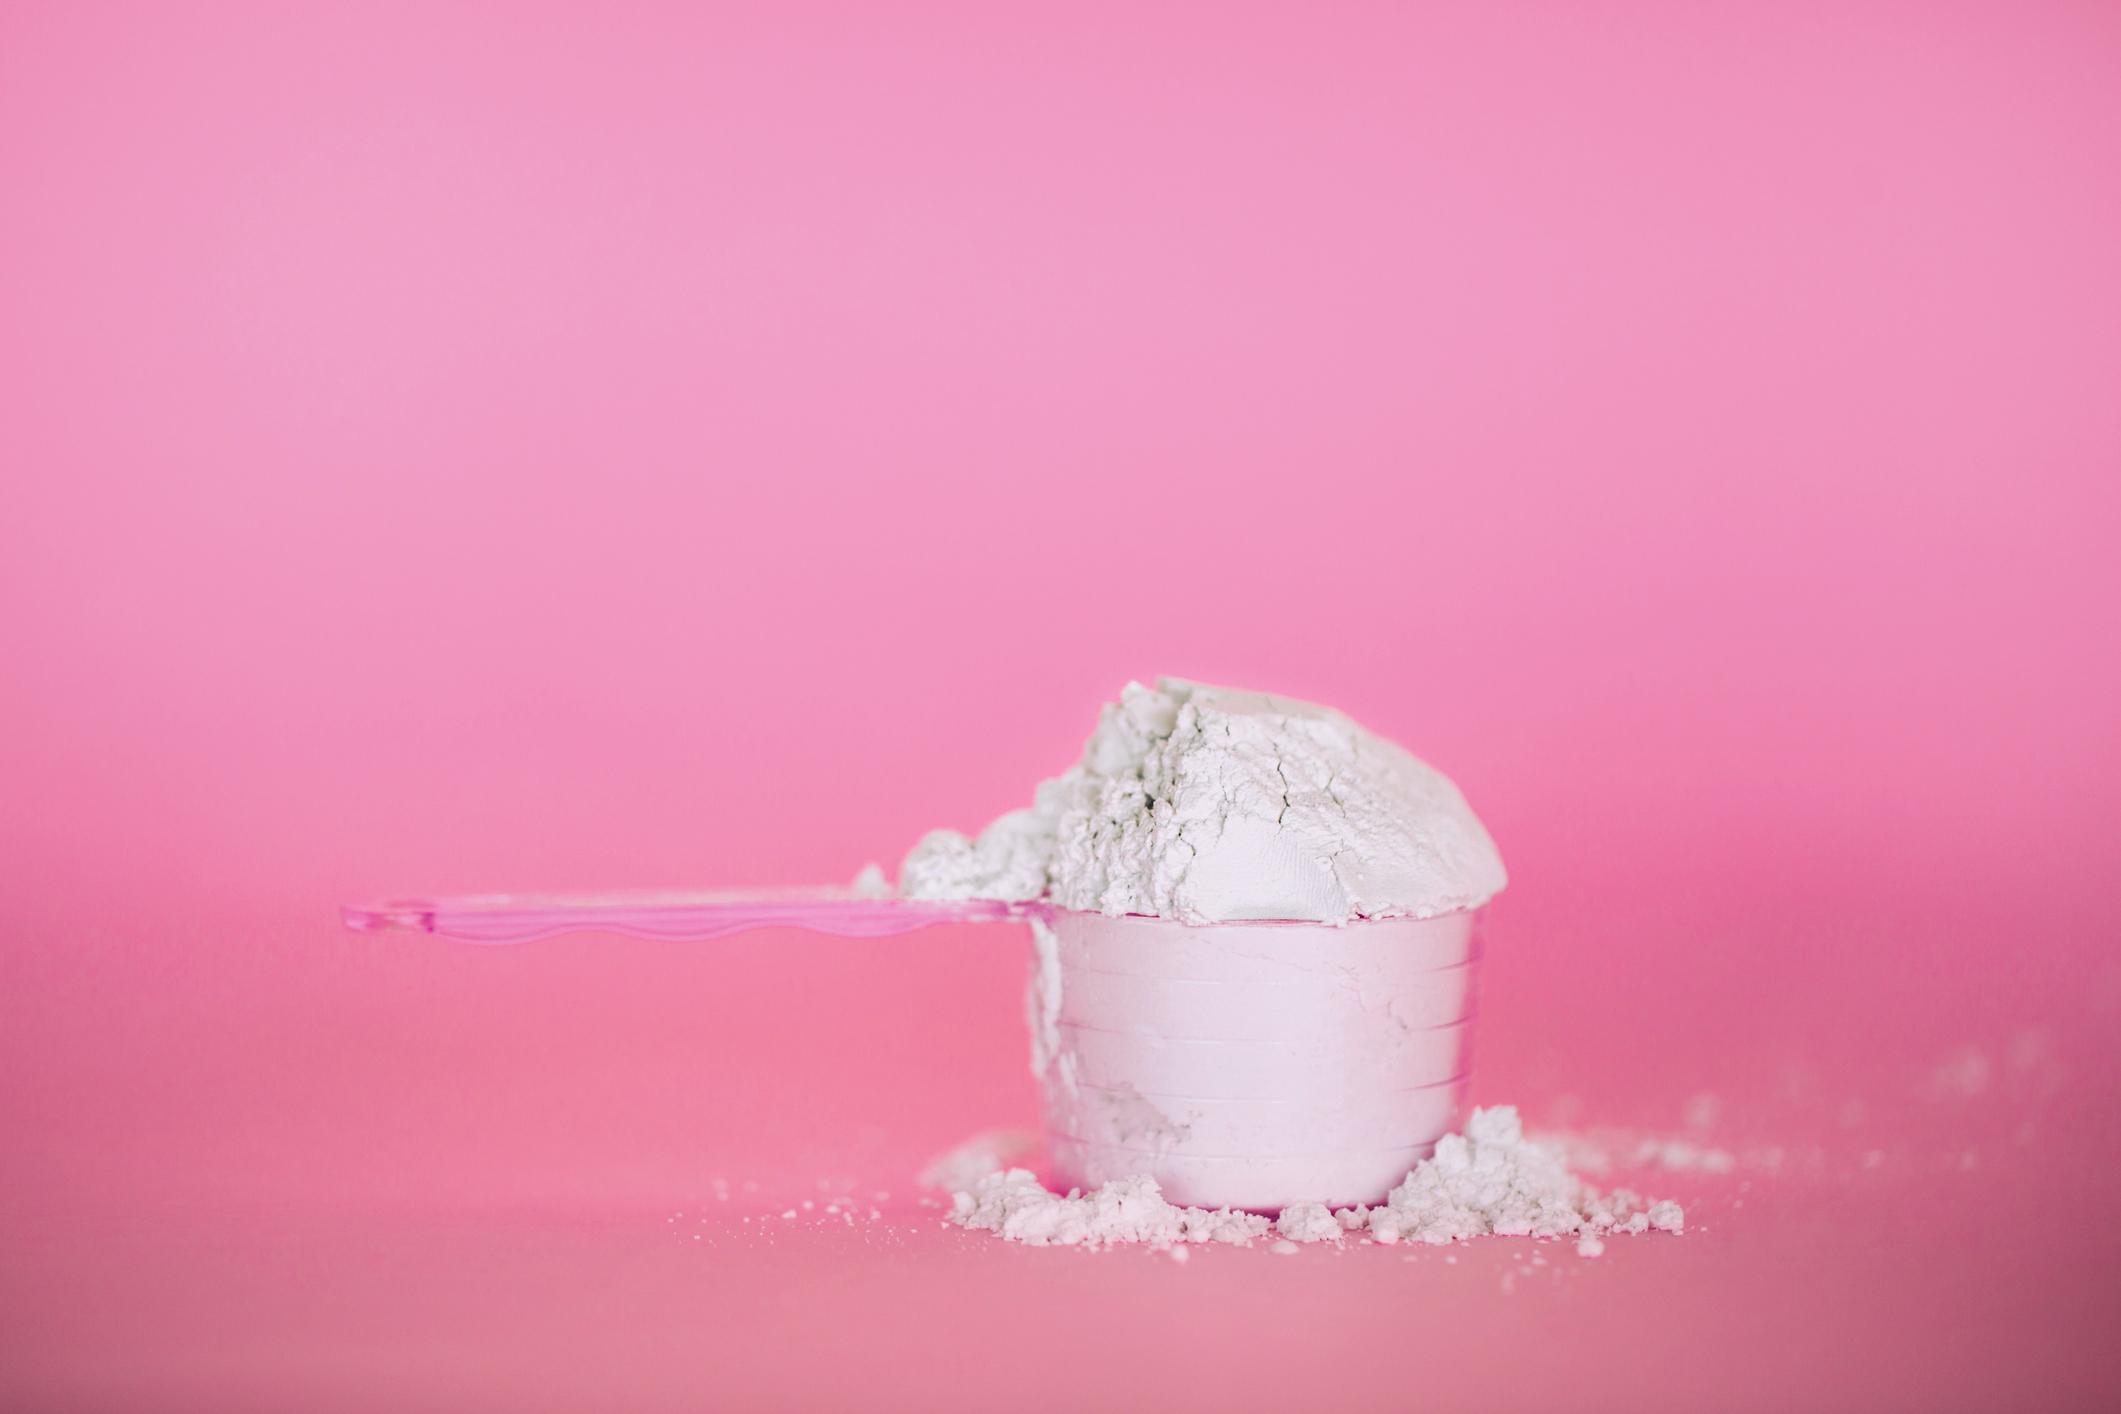  A pink spoon measuring protein powder against a pink background.  